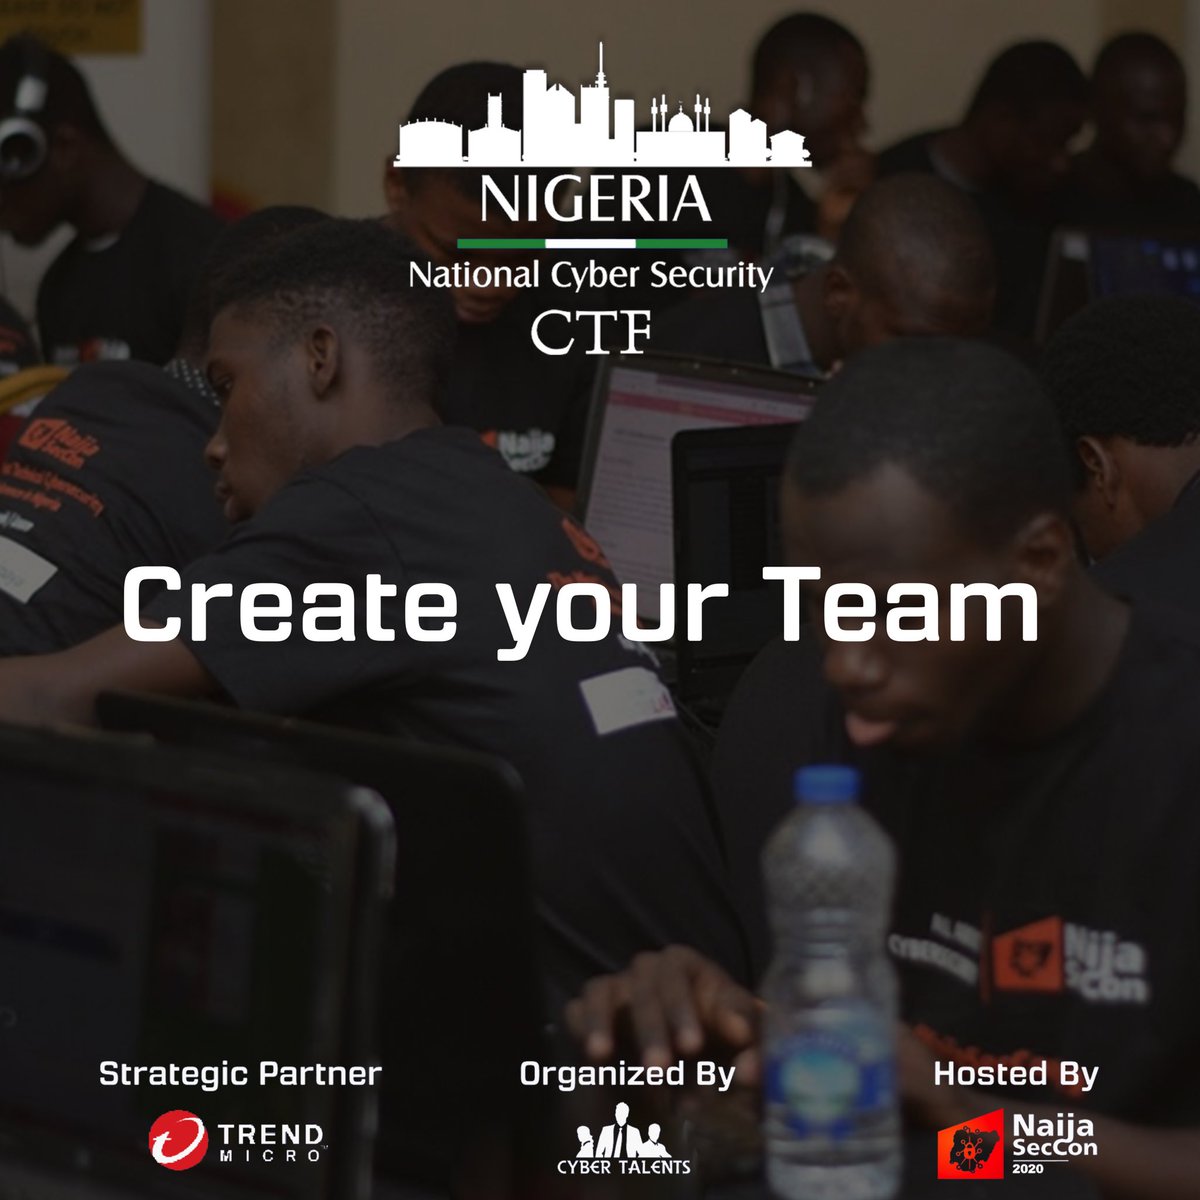 We've partnered with trend micro and Cybertalents to discover the best cybertalents in Nigeria via our annual NaijaSecCon CTF competition.

Winning team will be fully sponsored to represent Nigeria Internationally.

Register here: bit.ly/NscCTF2020Quals #TagAFriend